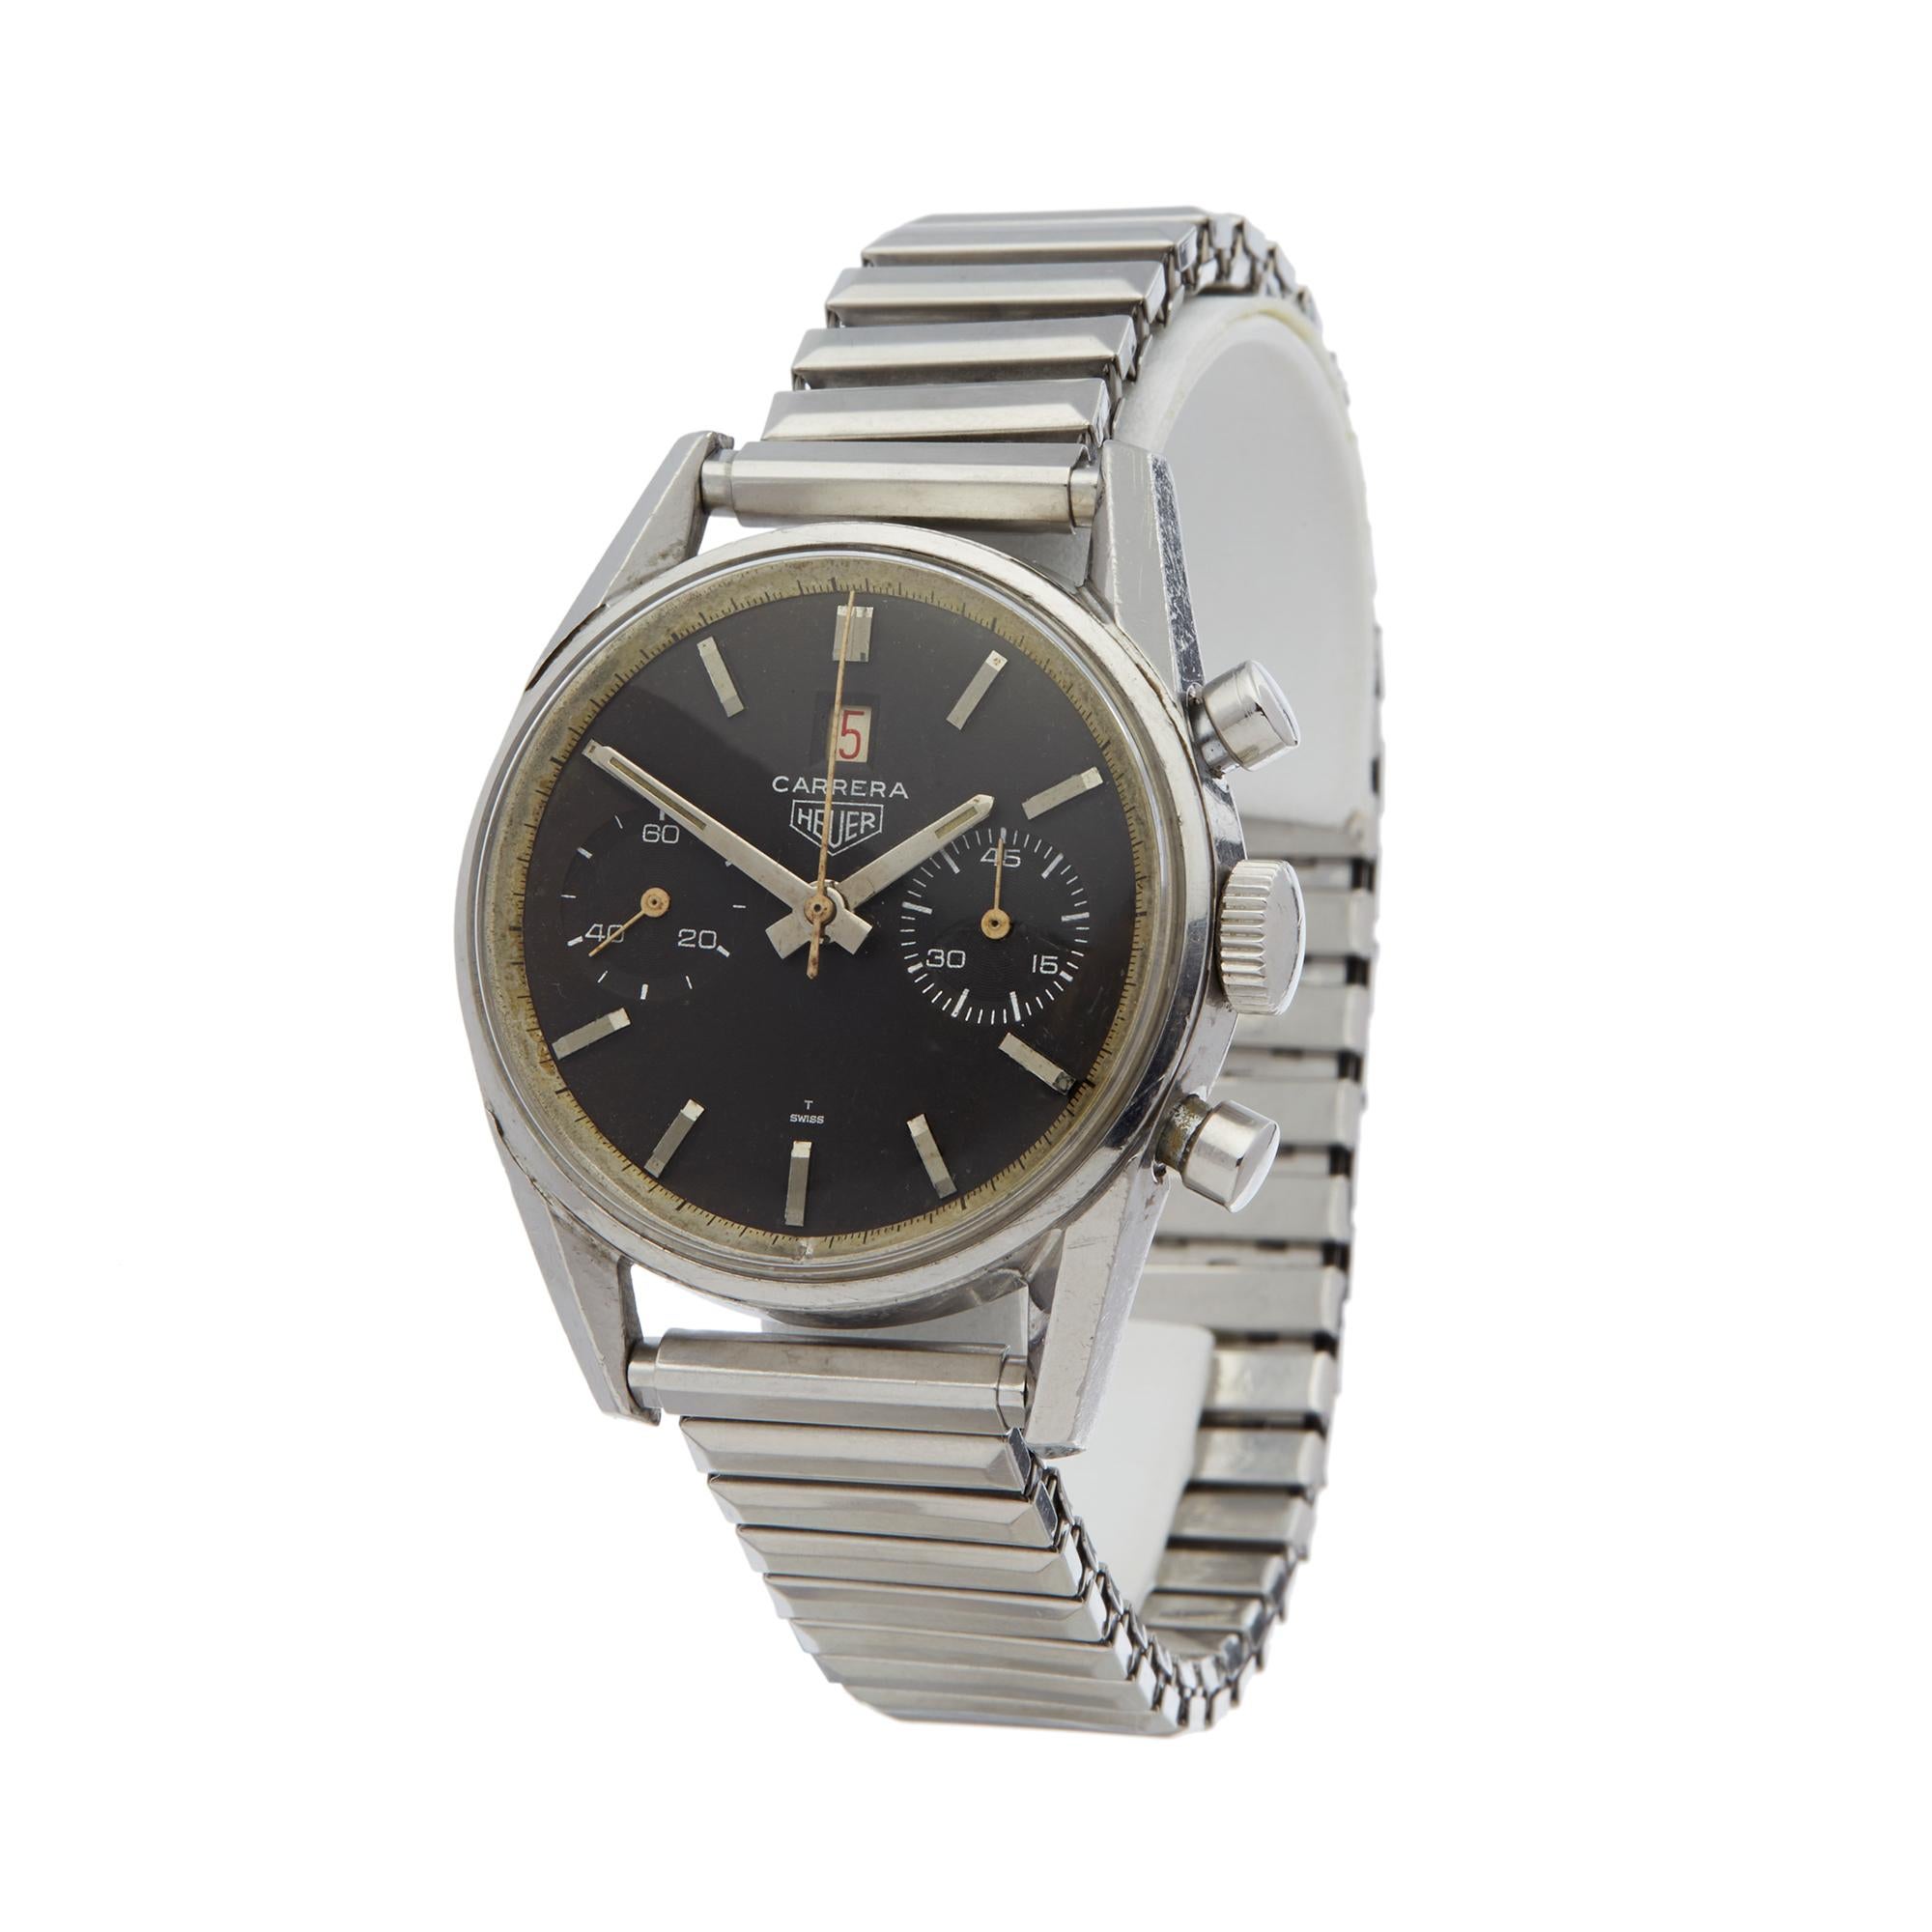 Reference: COM1886
Manufacturer: Heuer
Model: Carrera
Model Reference: 3147 N
Age: Circa 1960's
Gender: Men's
Box and Papers: Presentation Box
Dial: Black Baton
Glass: Plexiglass
Movement: Mechanical Wind
Water Resistance: Not Recommended for Use in